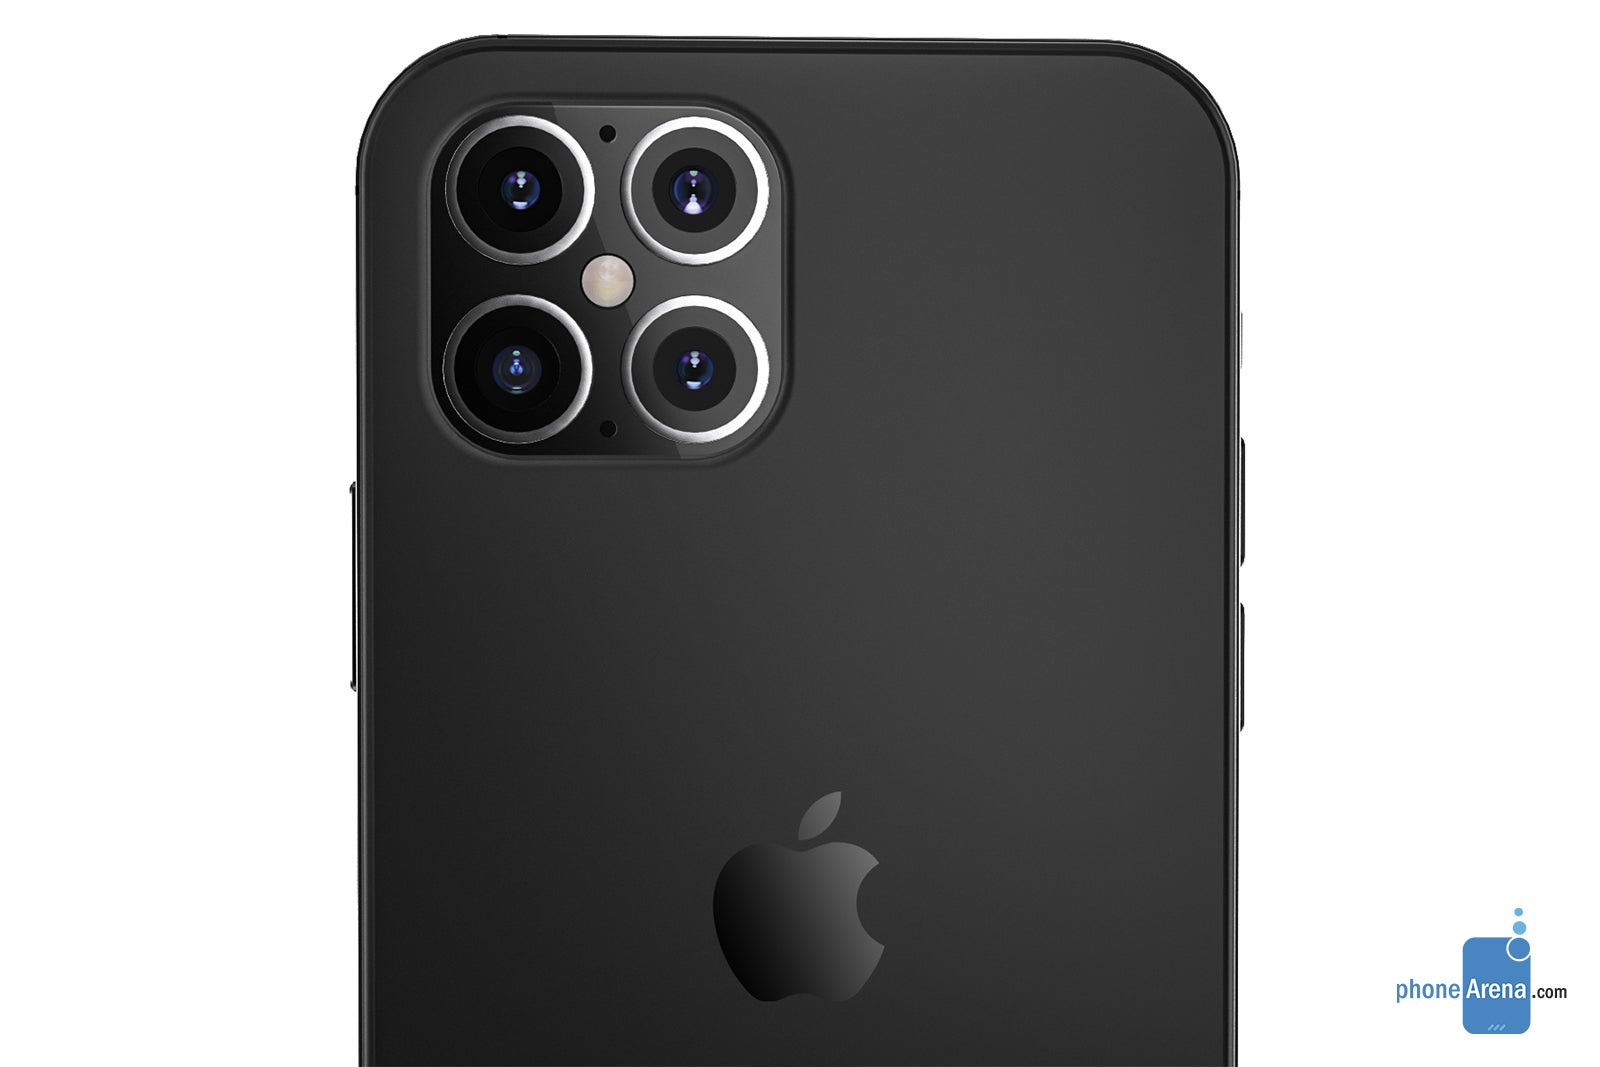 Apple iPhone 12 Pro concept render based on early information - Apple's 2020 iPhones could introduce this big camera upgrade